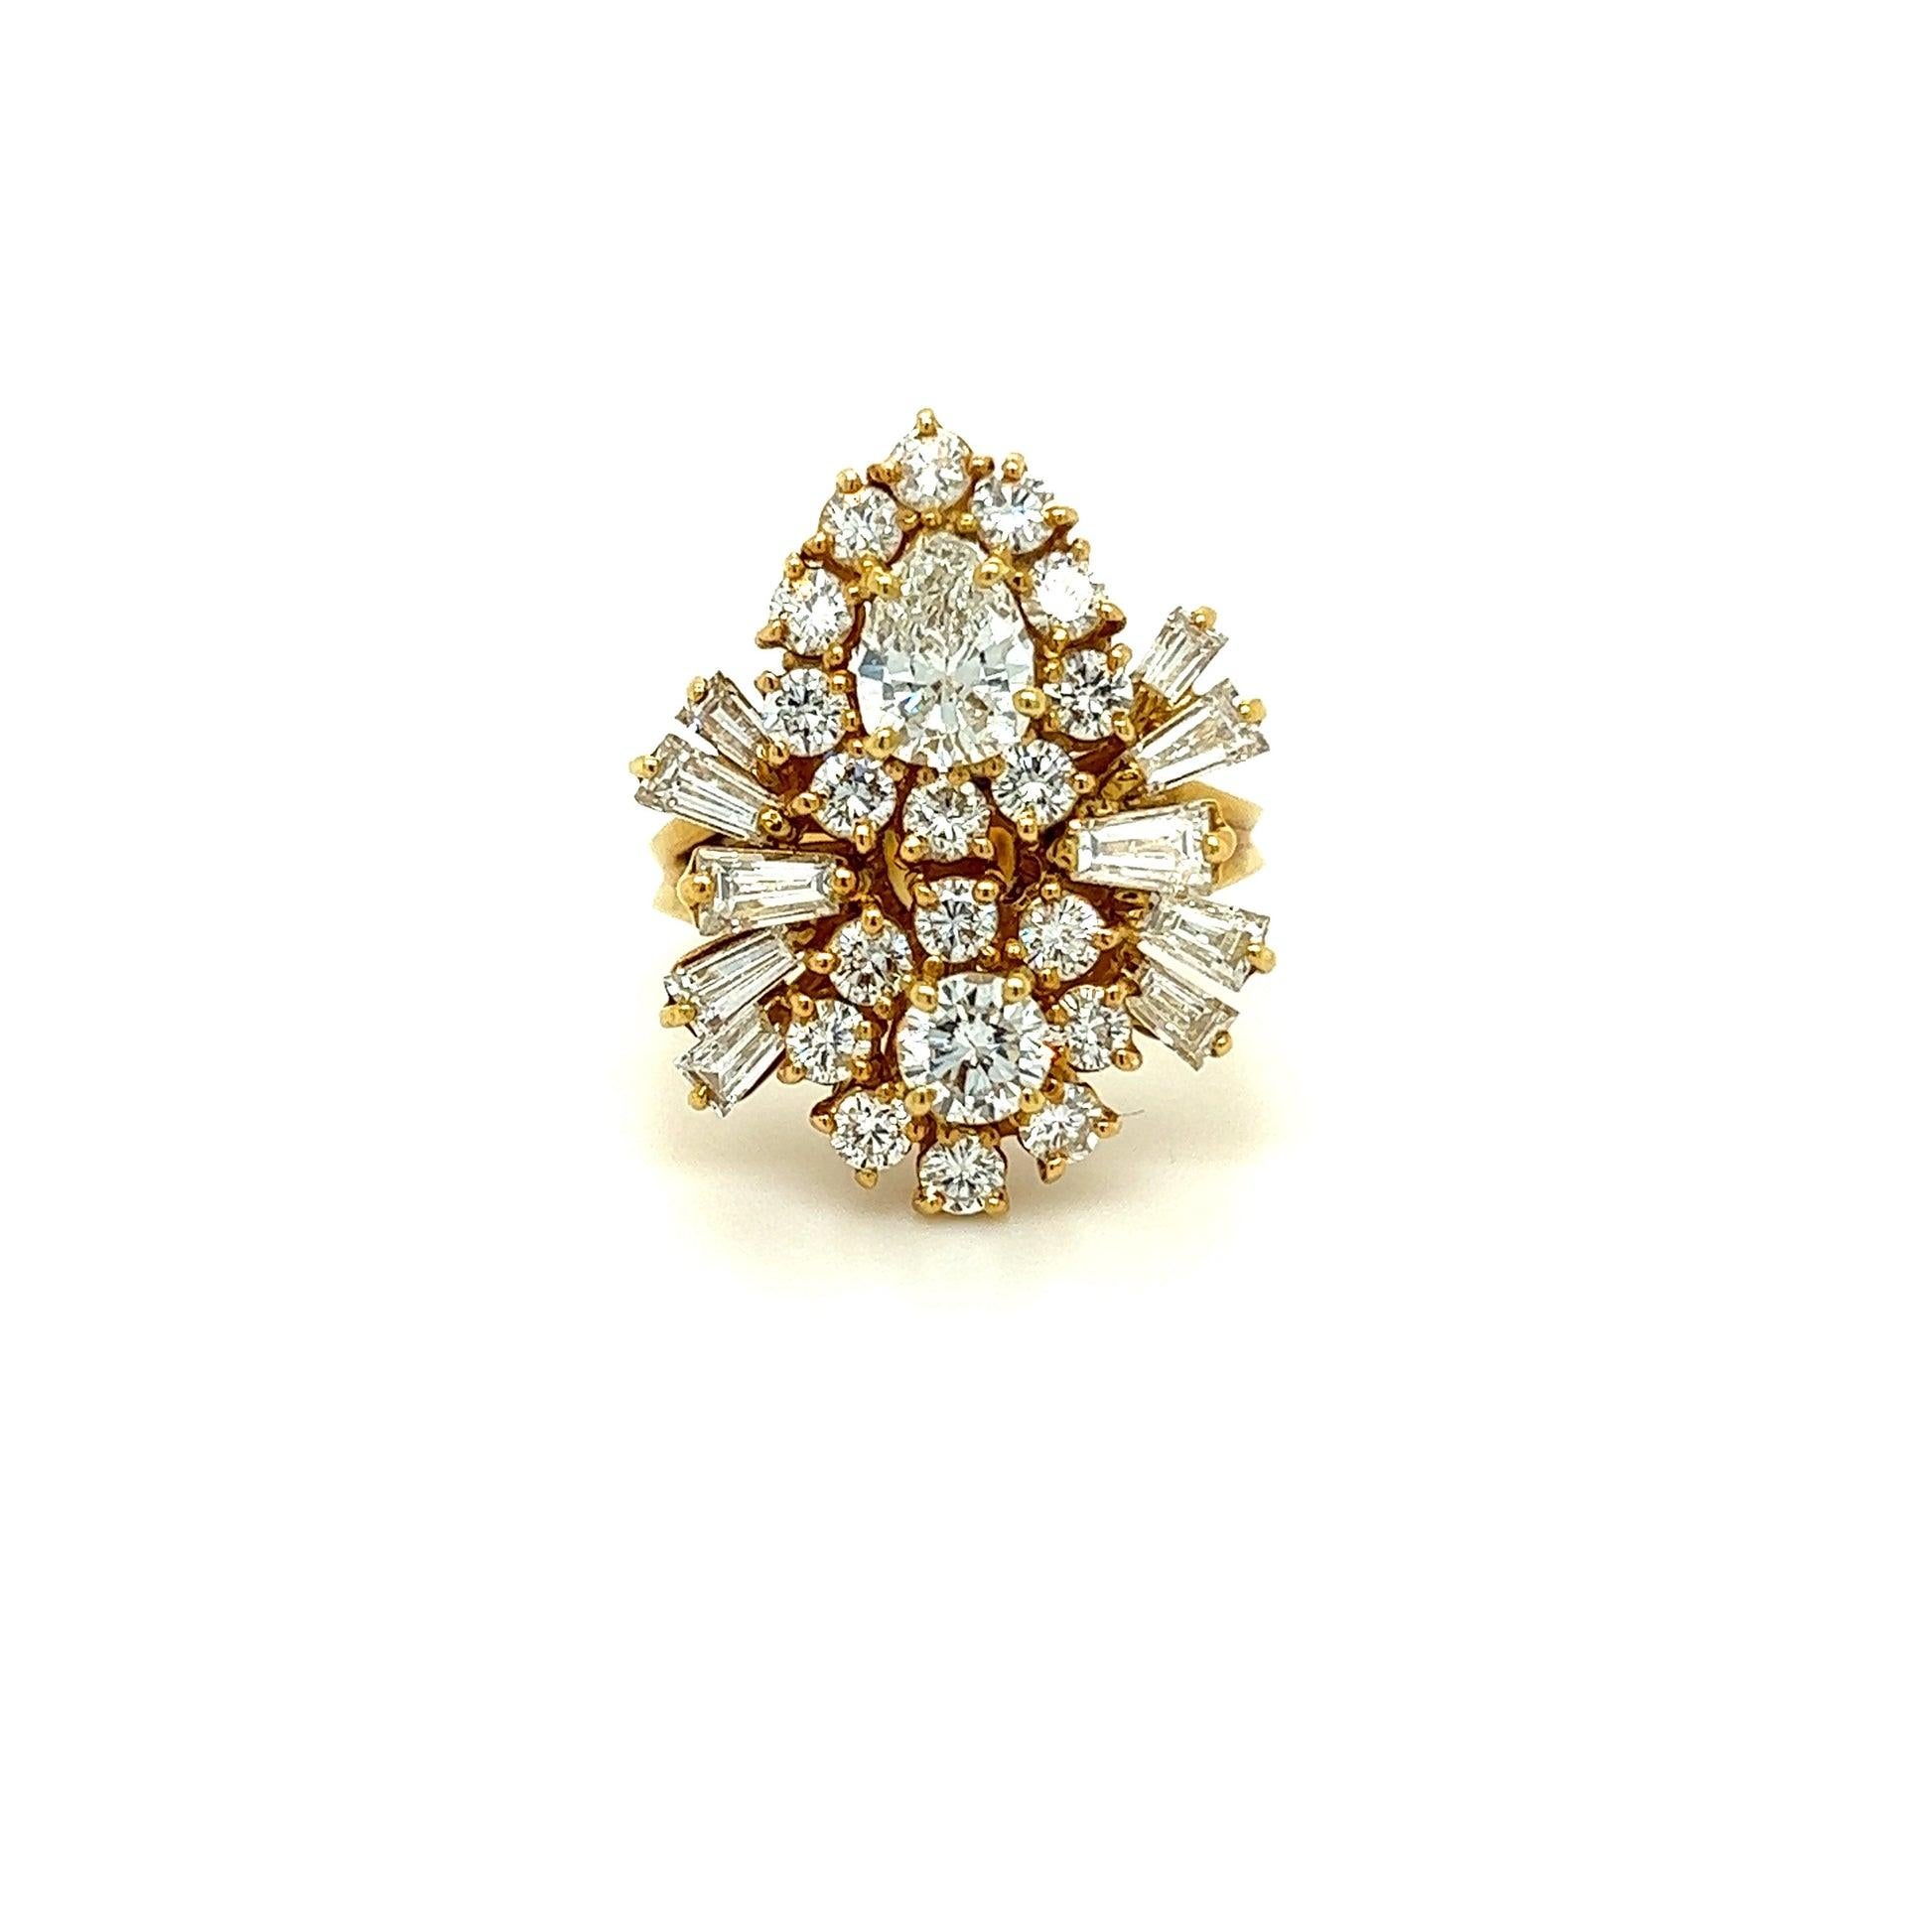 Gorgeous 18k Yellow Gold Diamond Cluster Ring
Features Pear Shaped and Round Brilliant Cut Natural Diamond With Thirty Nine Round Brilliant Cut and Tapered Baguette Cut Natural Diamonds.

Stone : Dimond
Type: Natural
Shape & Cut : Pear and round